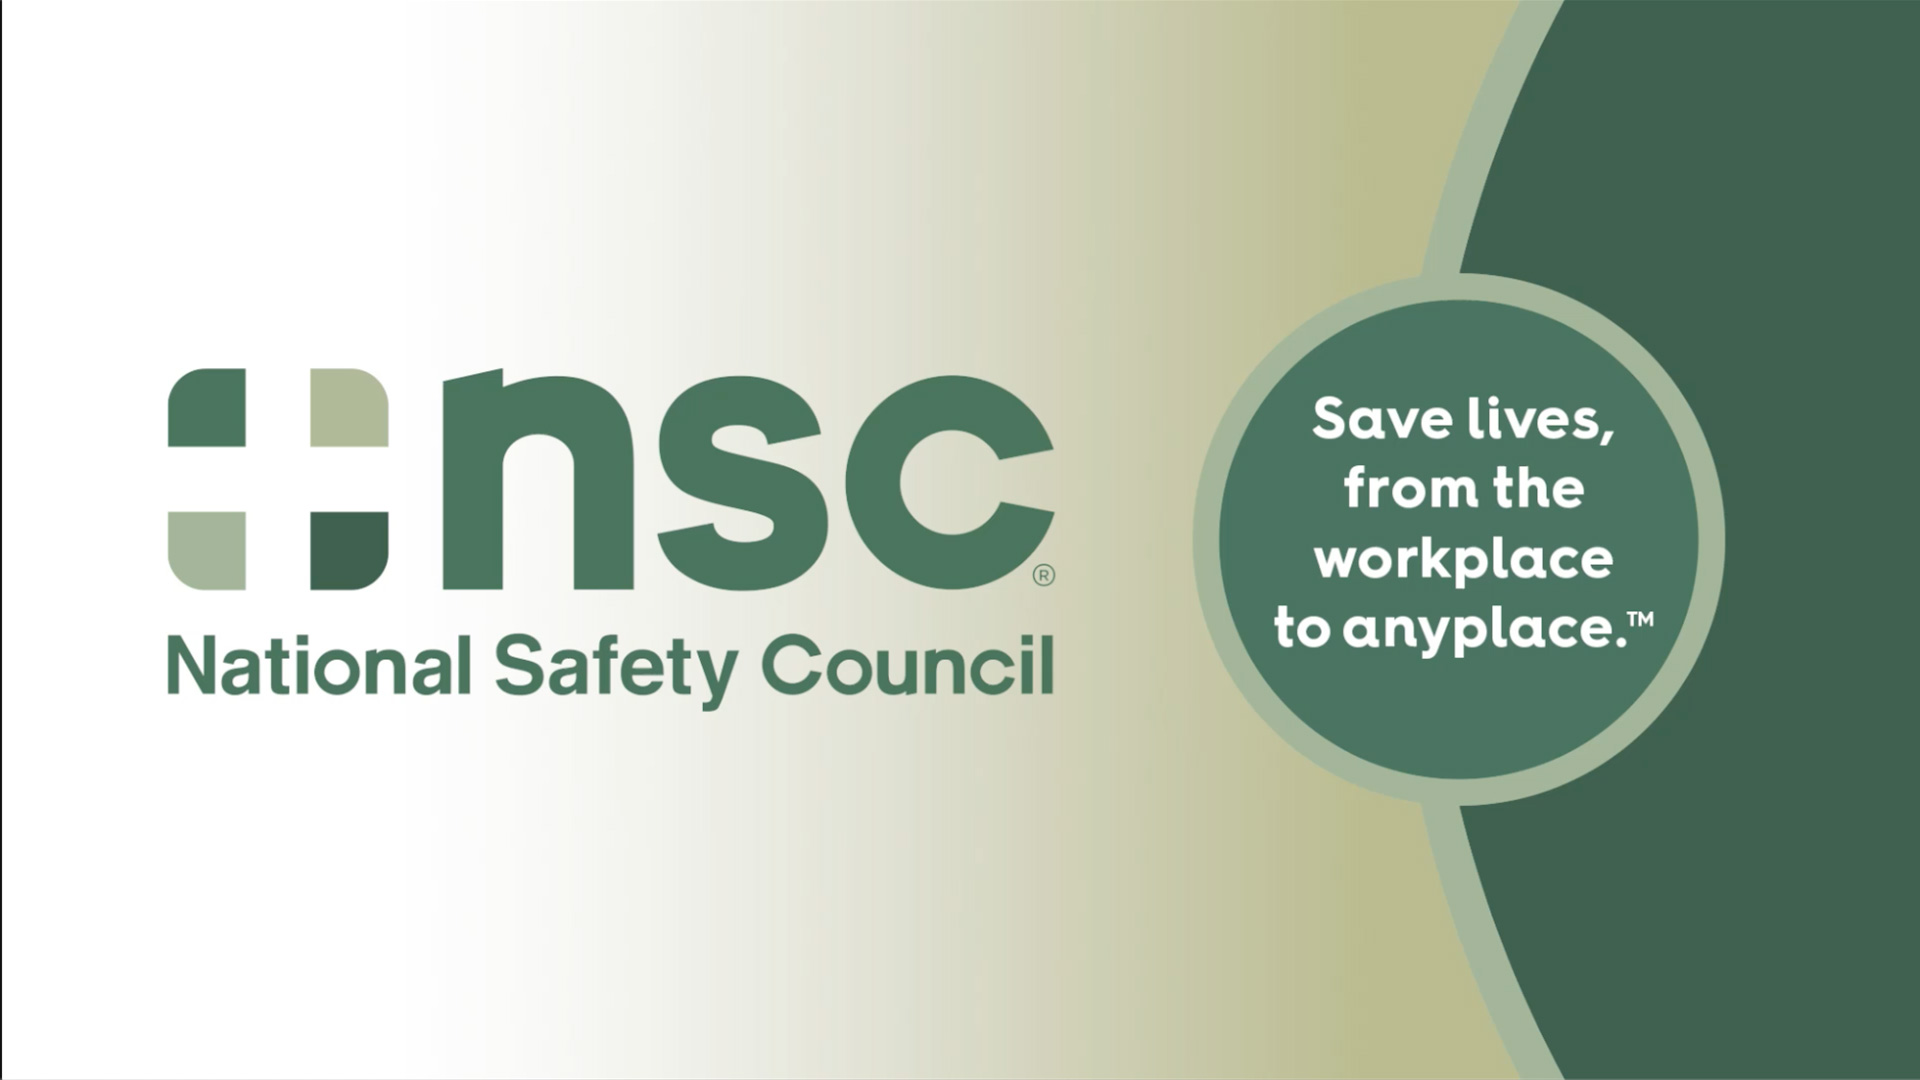 National Safety Council Annual Report